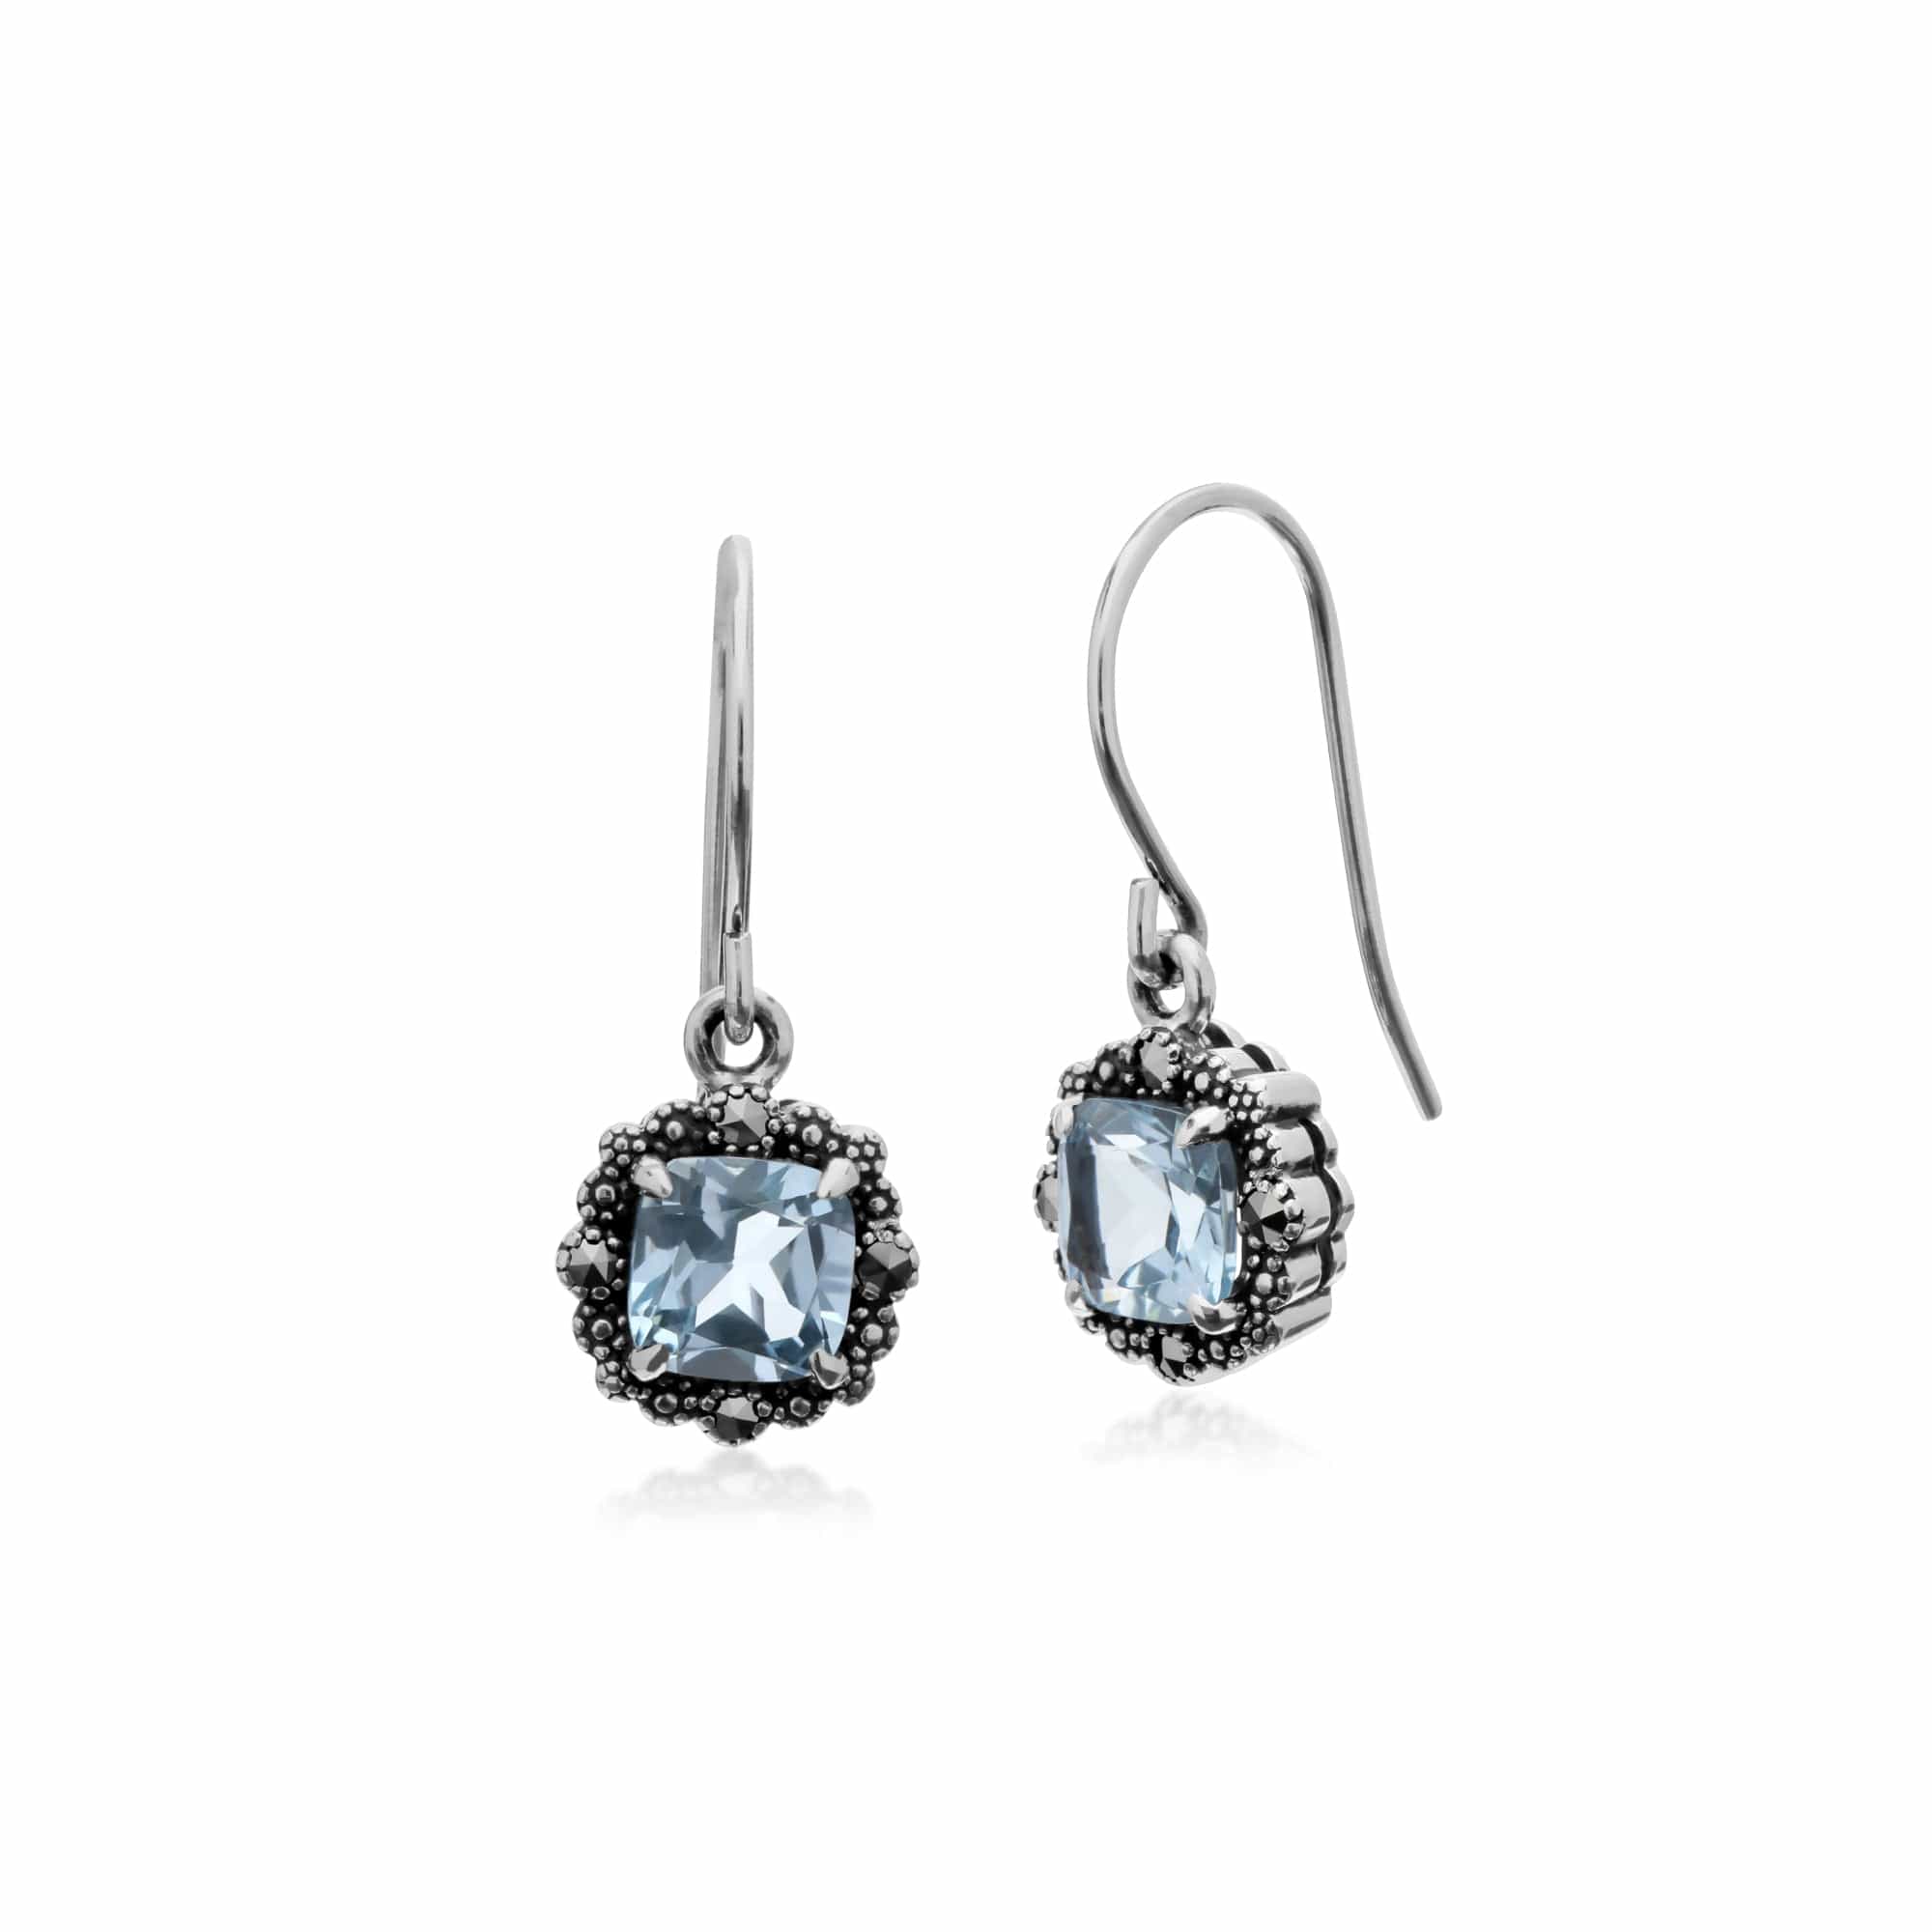 214E870901925-214P301502925 Art Deco Style Cushion Blue Topaz & Marcasite Cushion Drop Earrings & Necklace Set in 925 Sterling Silver 2